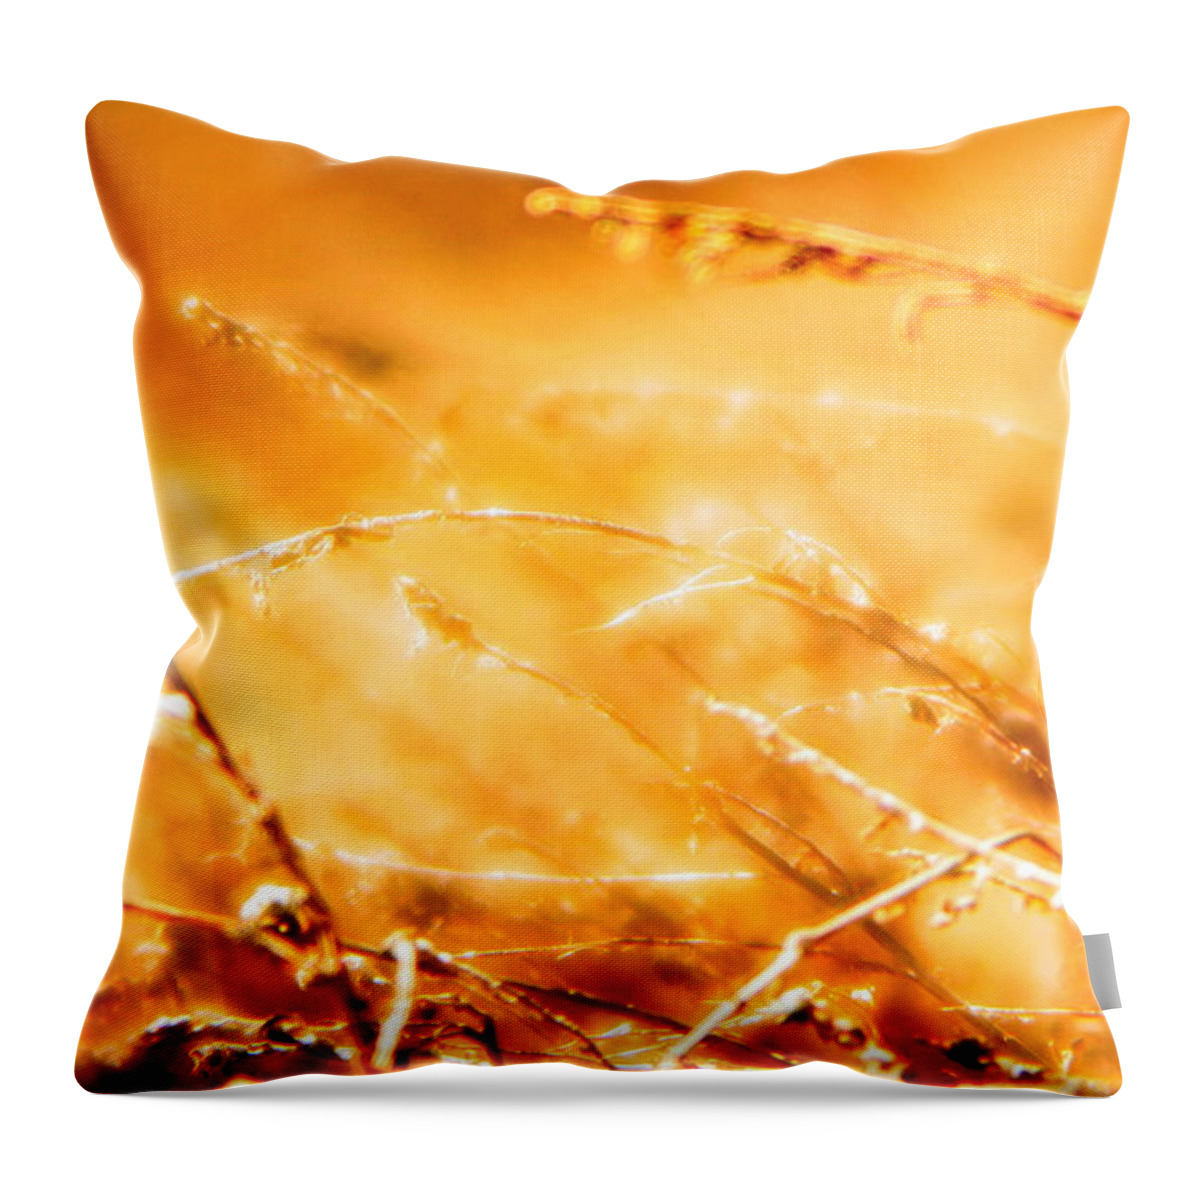 Grass Throw Pillow featuring the photograph Shimmer by Julie Lueders 